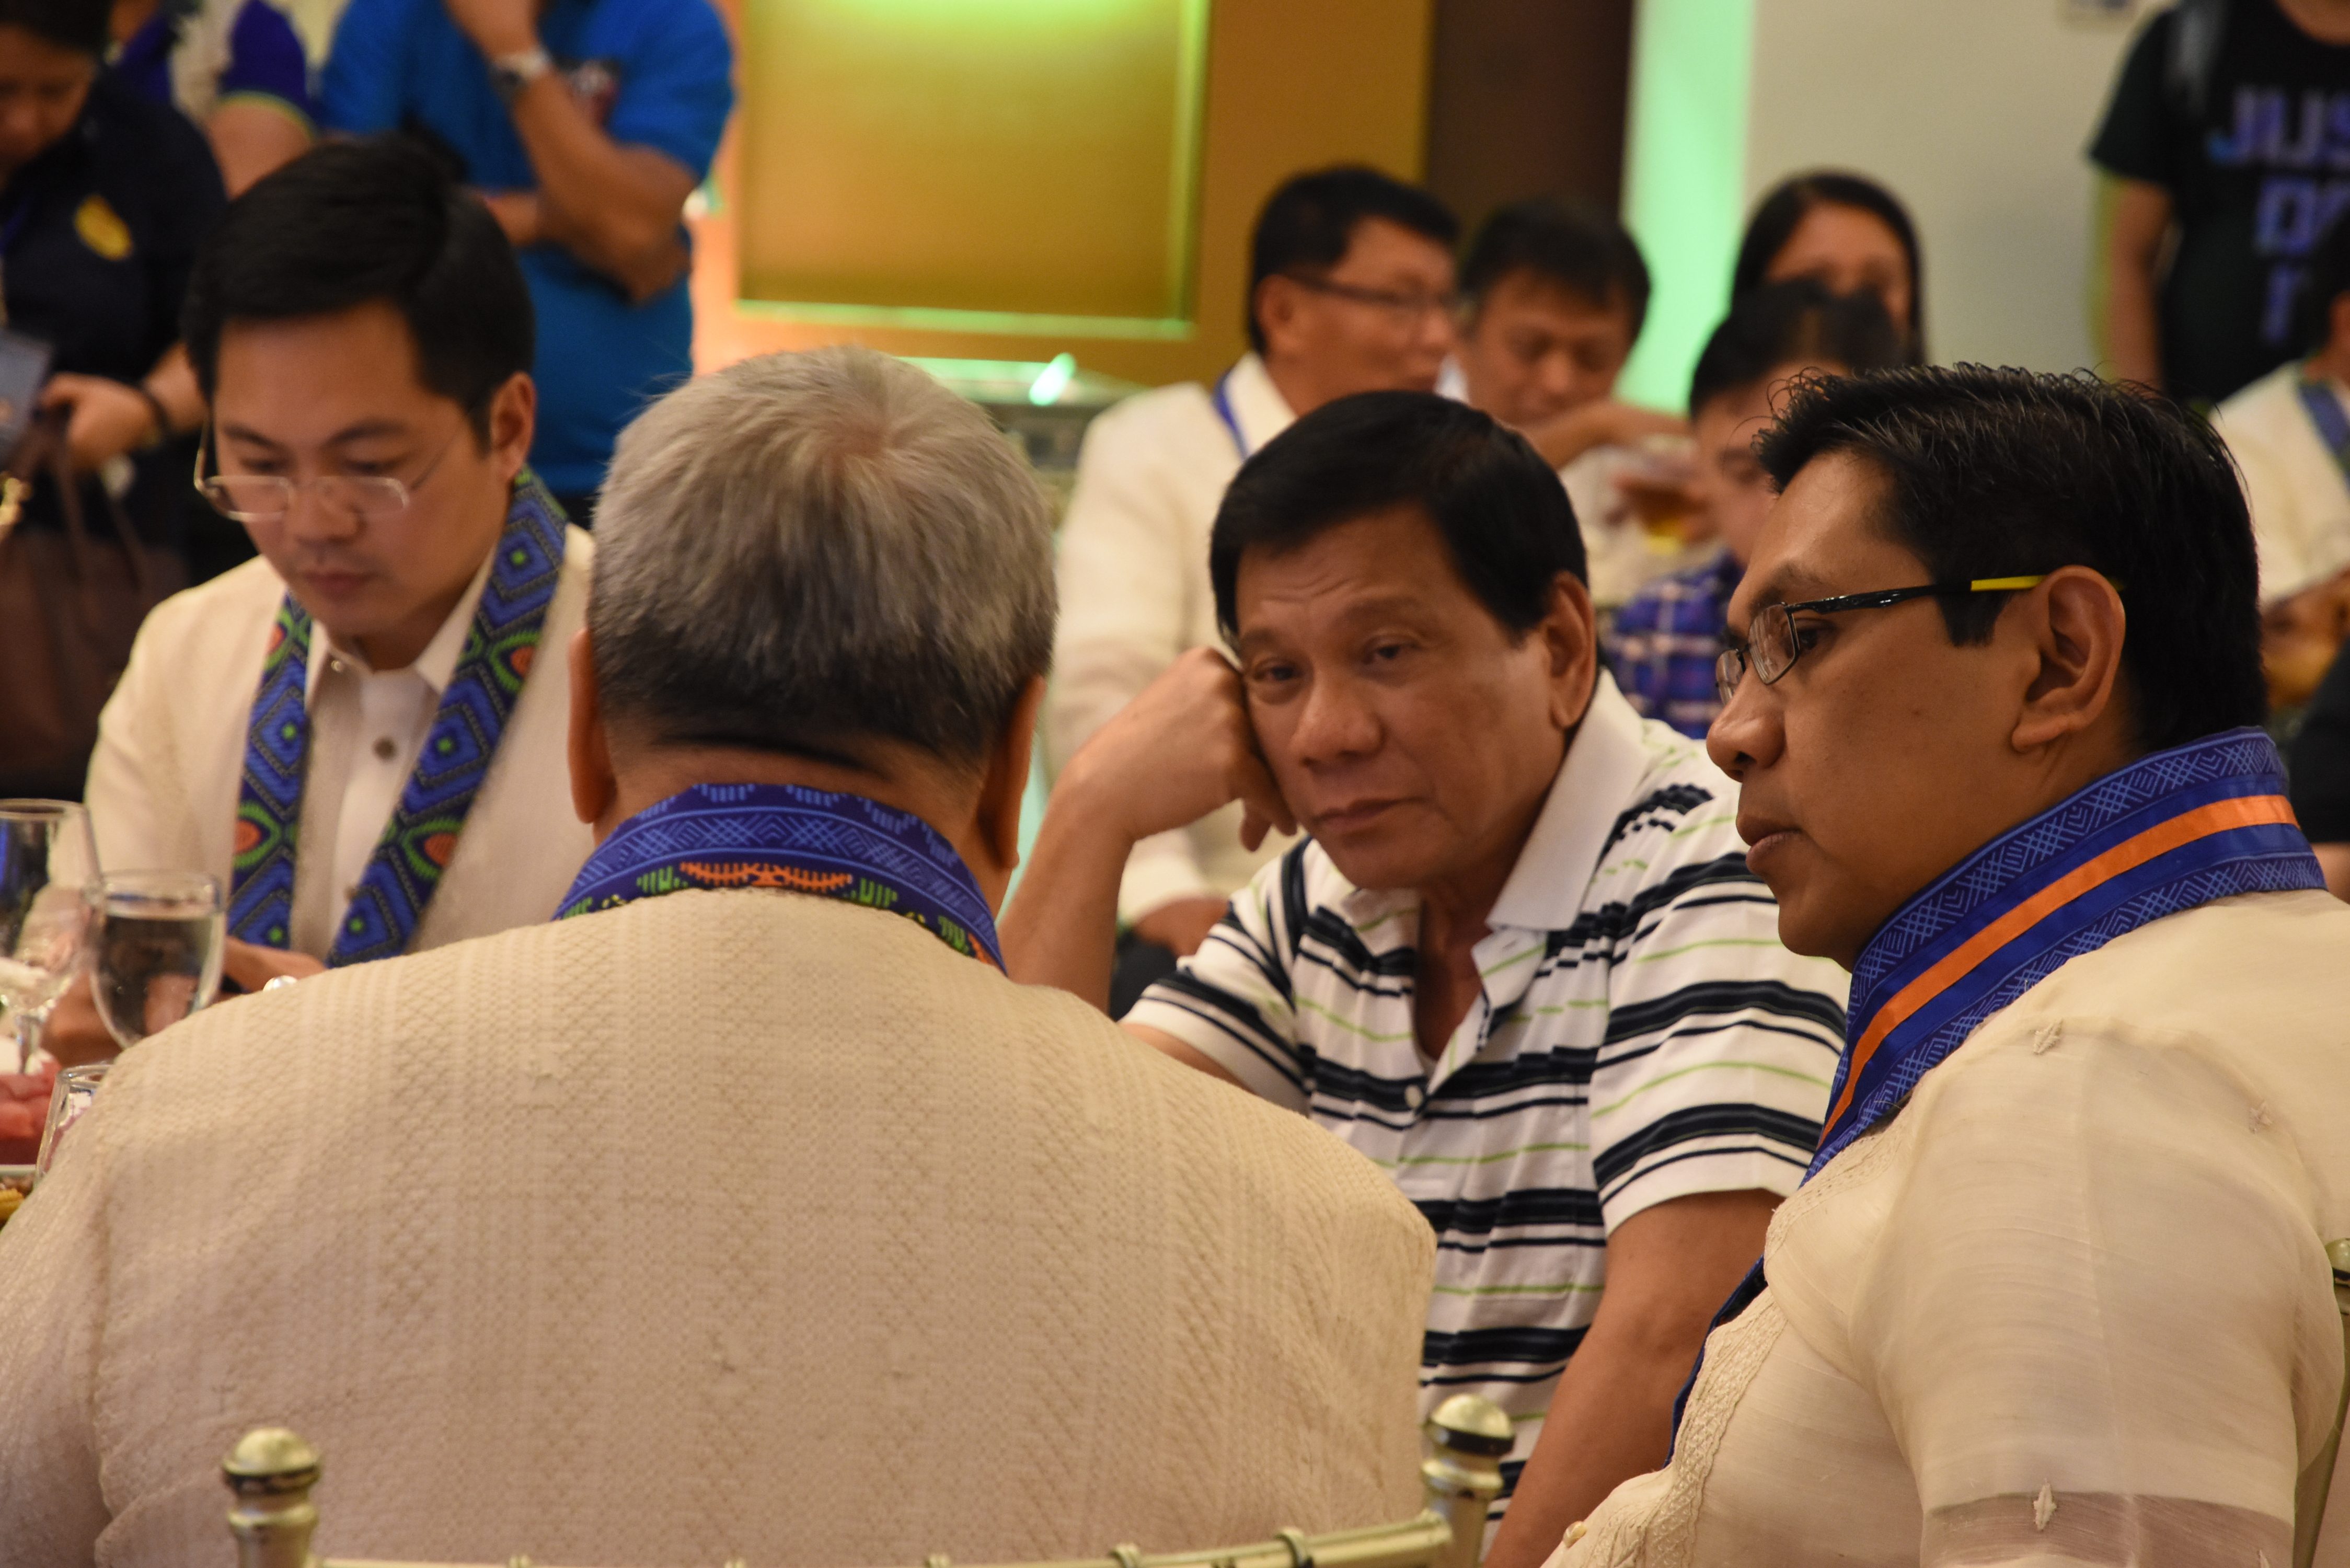 NON-SMOKING MAYORS. General Santos City Mayor Ronnel Rivera (right) says he wants to model his city's anti-smoking campaign after the Davao City program, which was started by Davao City Mayor Rodrigo Duterte (middle). Photo by Edwin Espejo/Rappler 